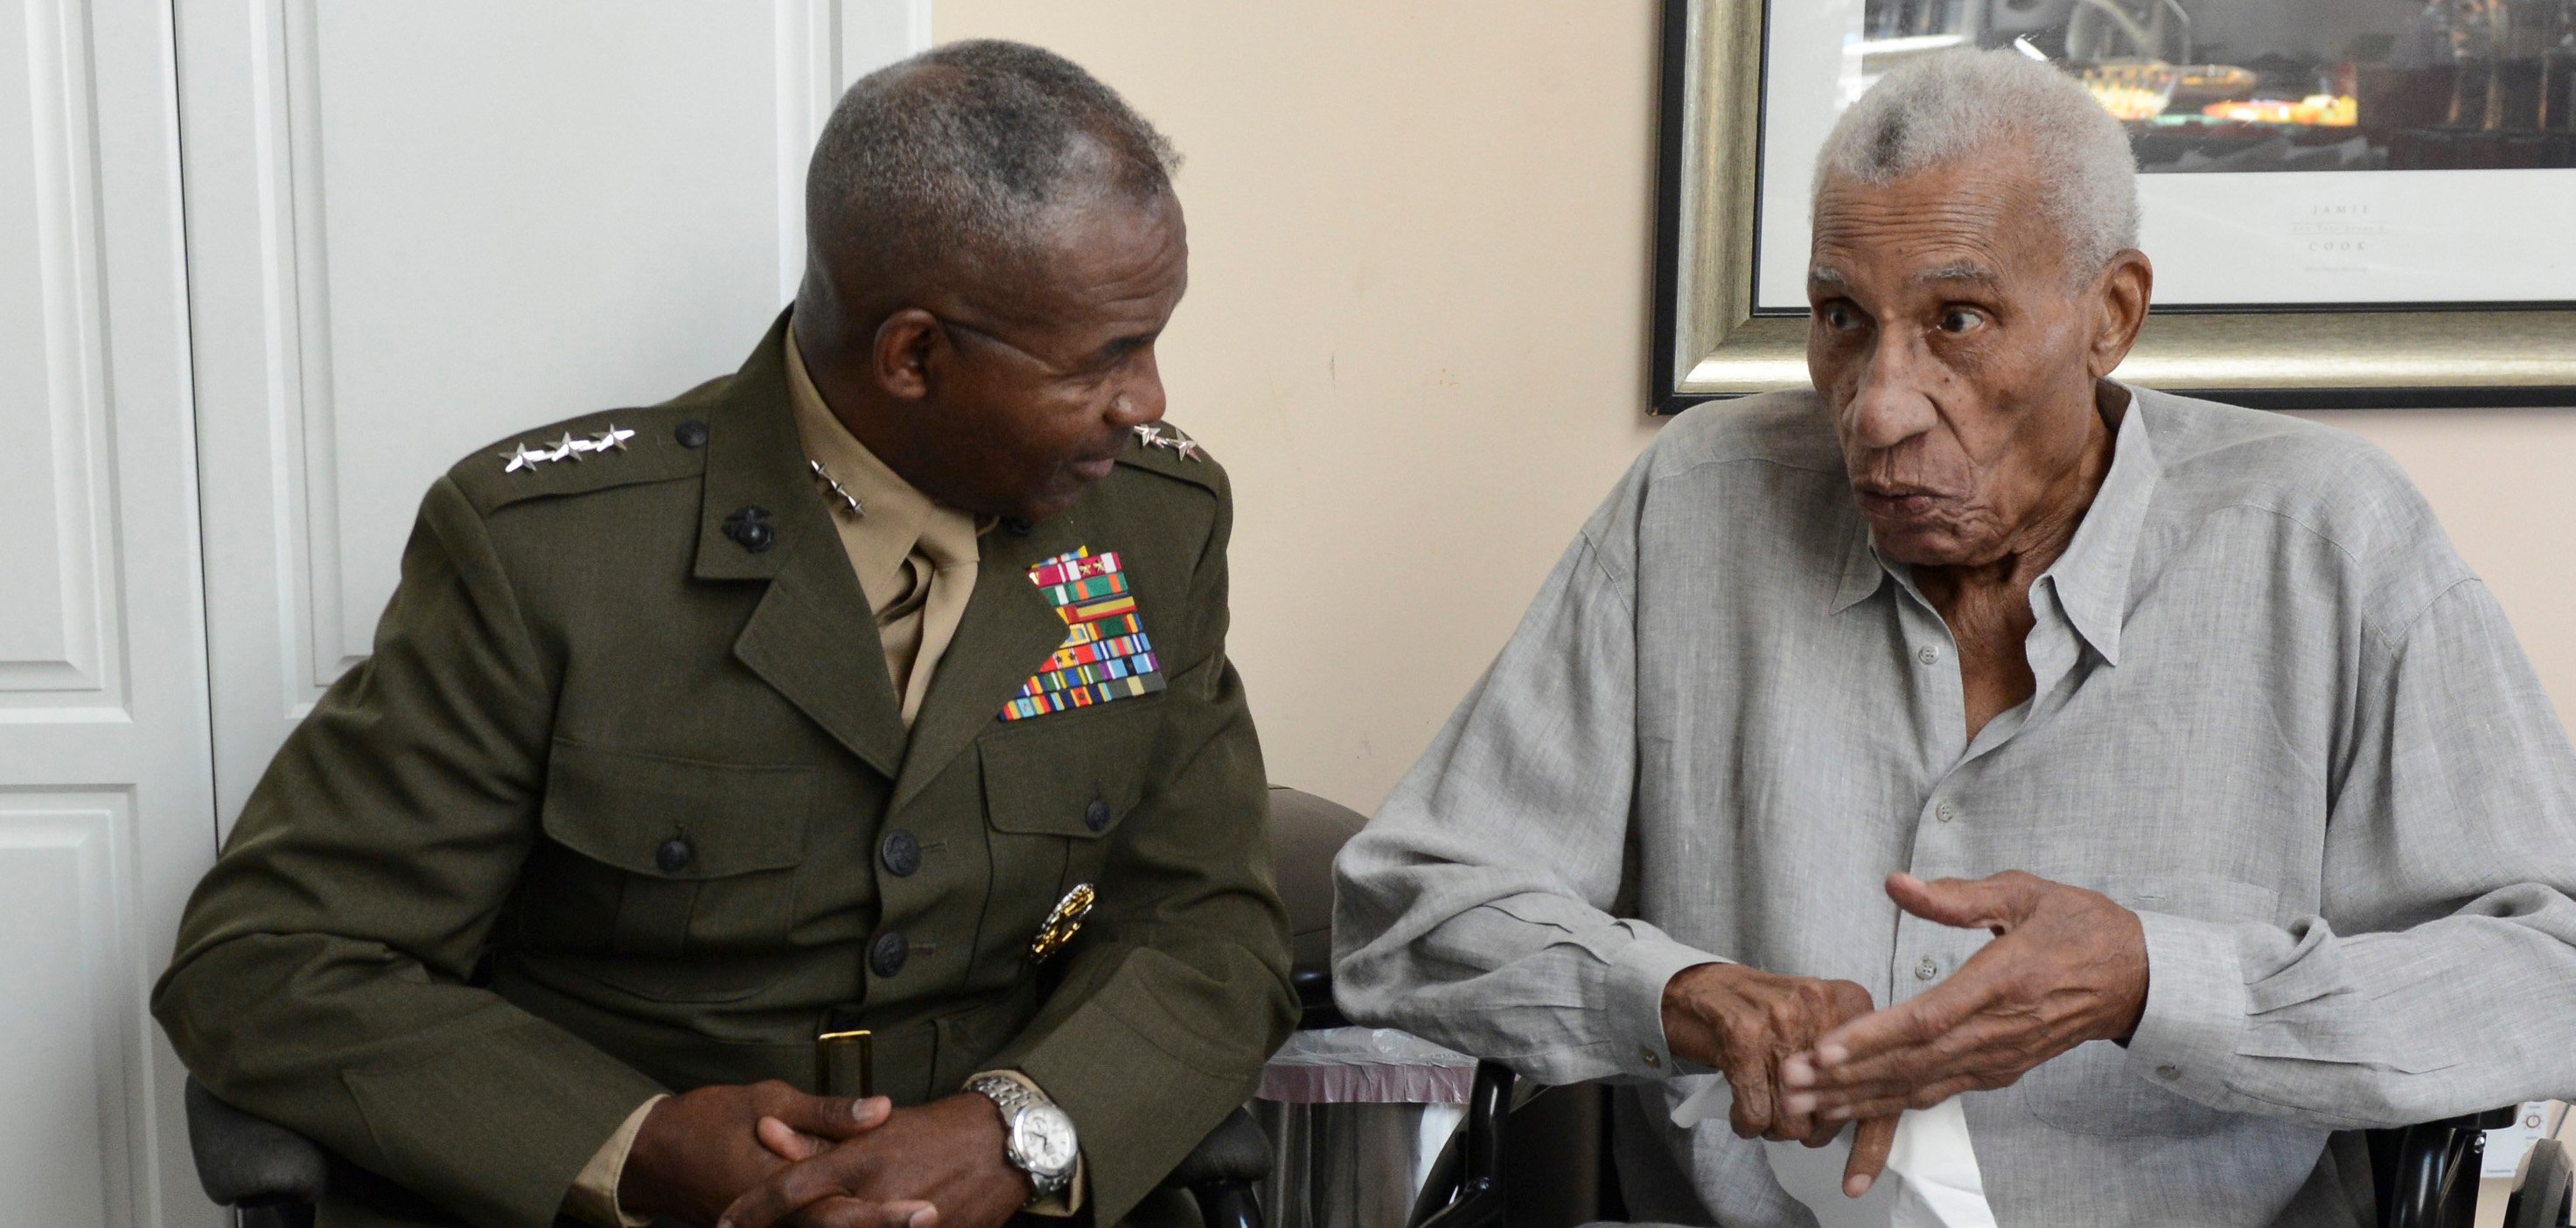 Lt. Gen. Frank E. Petersen, Jr. (ret), right, converses with Lt. Gen. Ronald Bailey, the deputy commandant for plans, policies, and operations with Headquarters Marine Corps in 2014. US Marine Corps